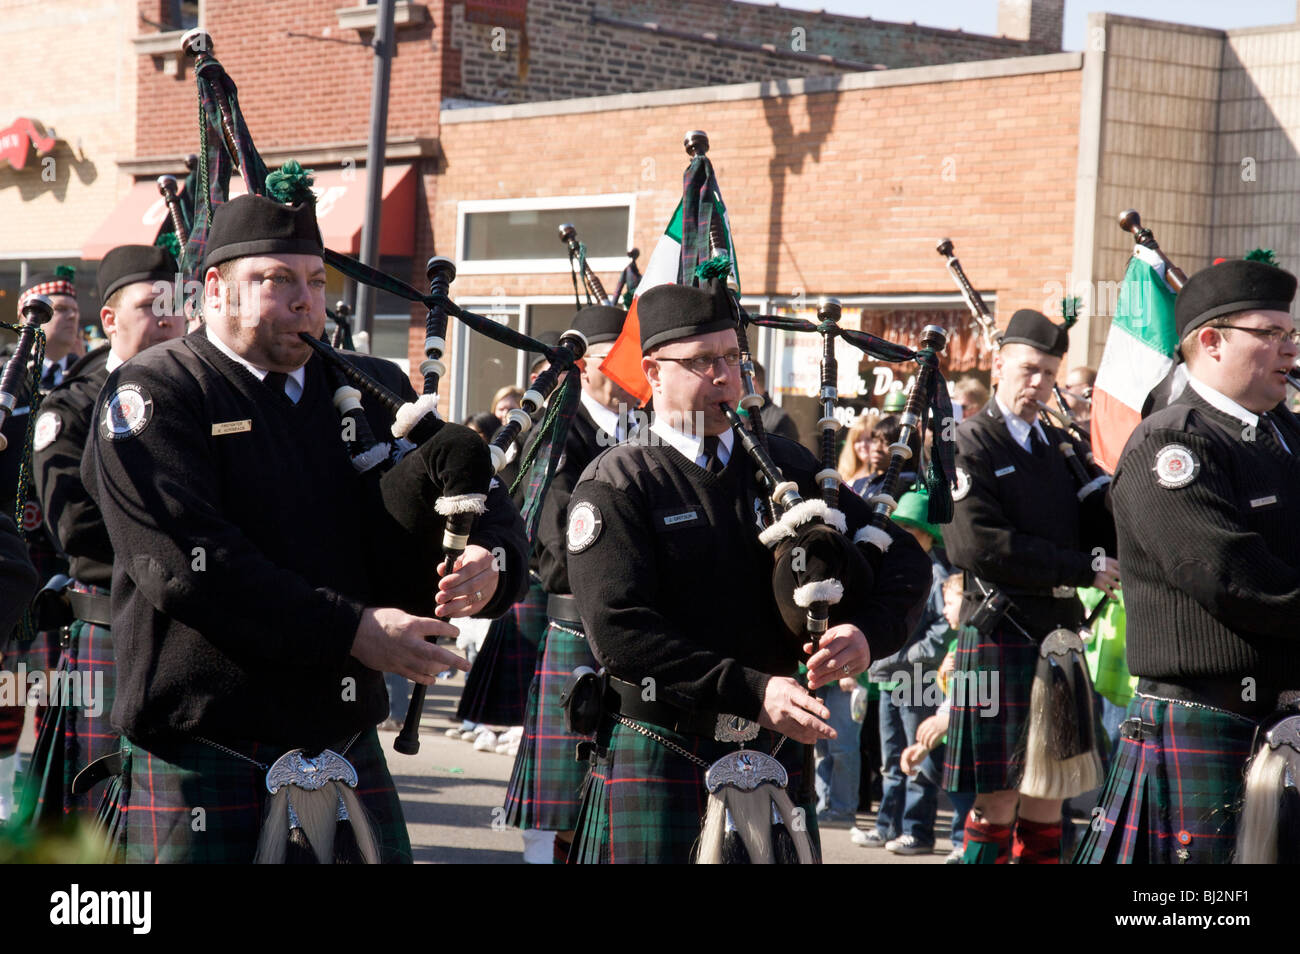 Band of Brothers Firefighter's pipe and drum corp. 2010 St. Patrick's Day Parade. Forest Park, Illinois. Stock Photo